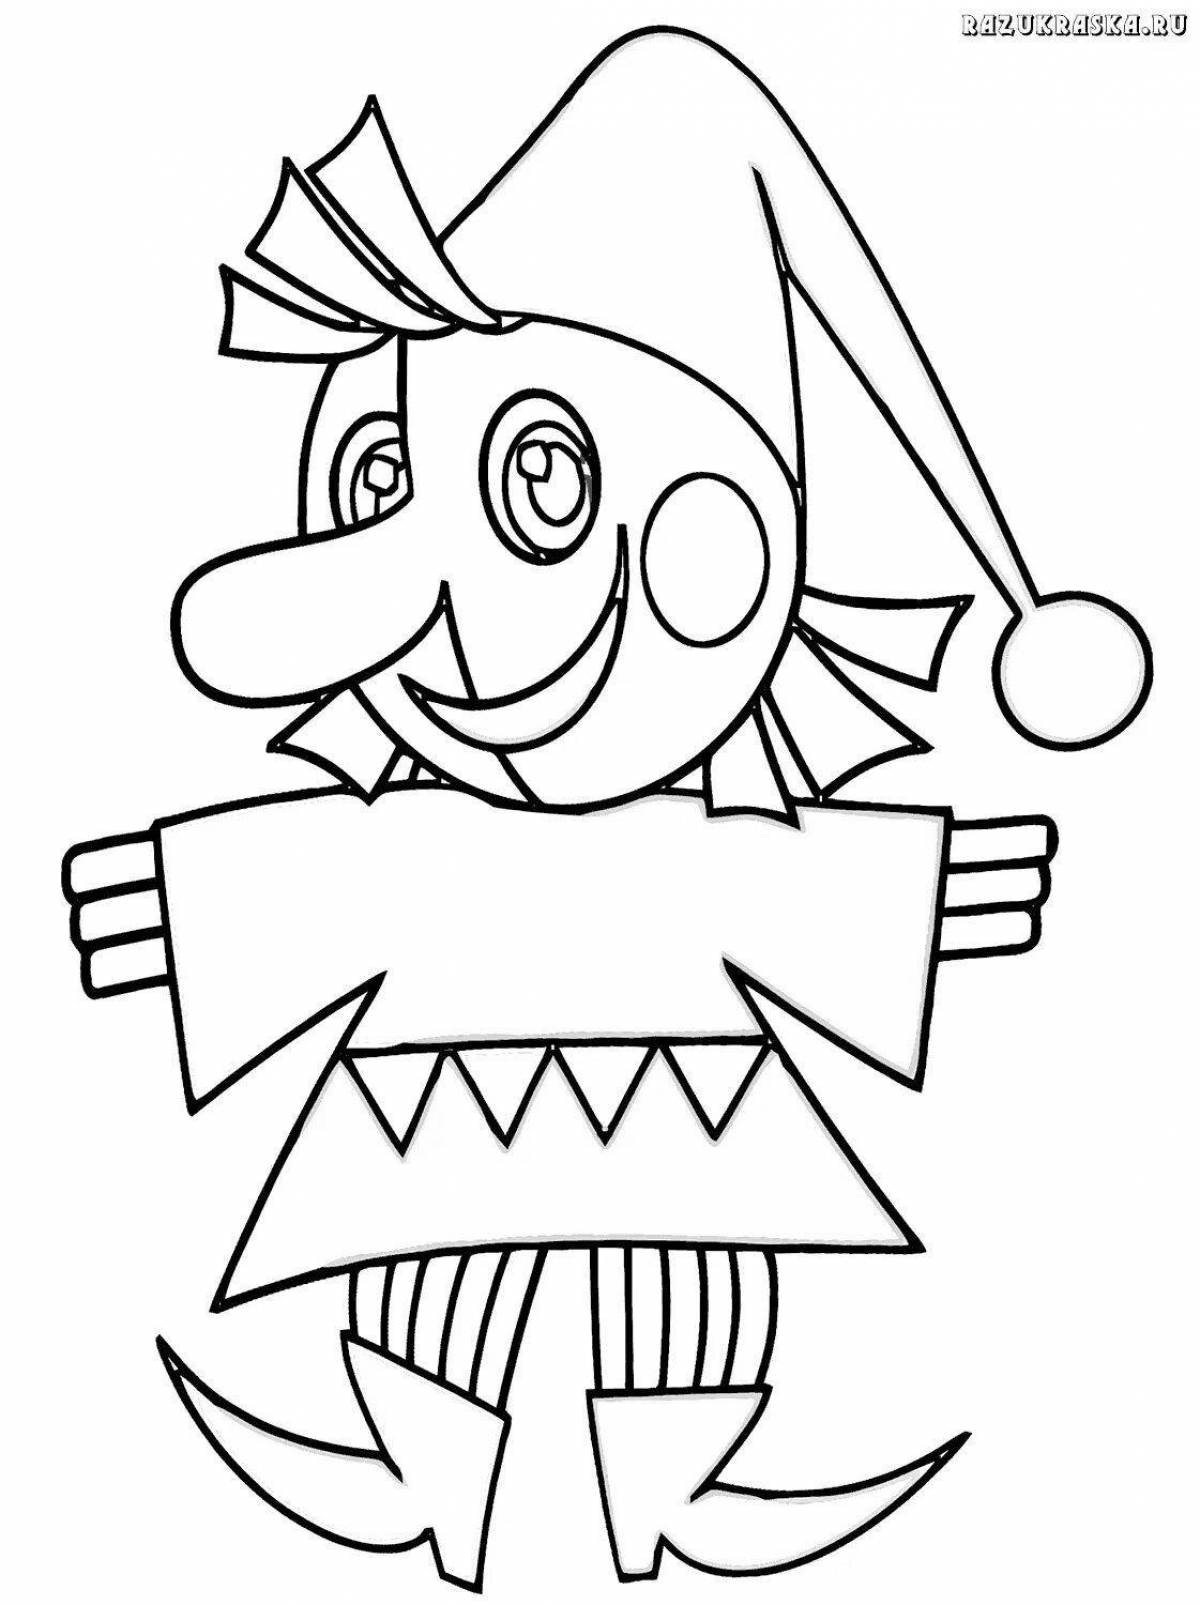 Funny parsley character coloring page